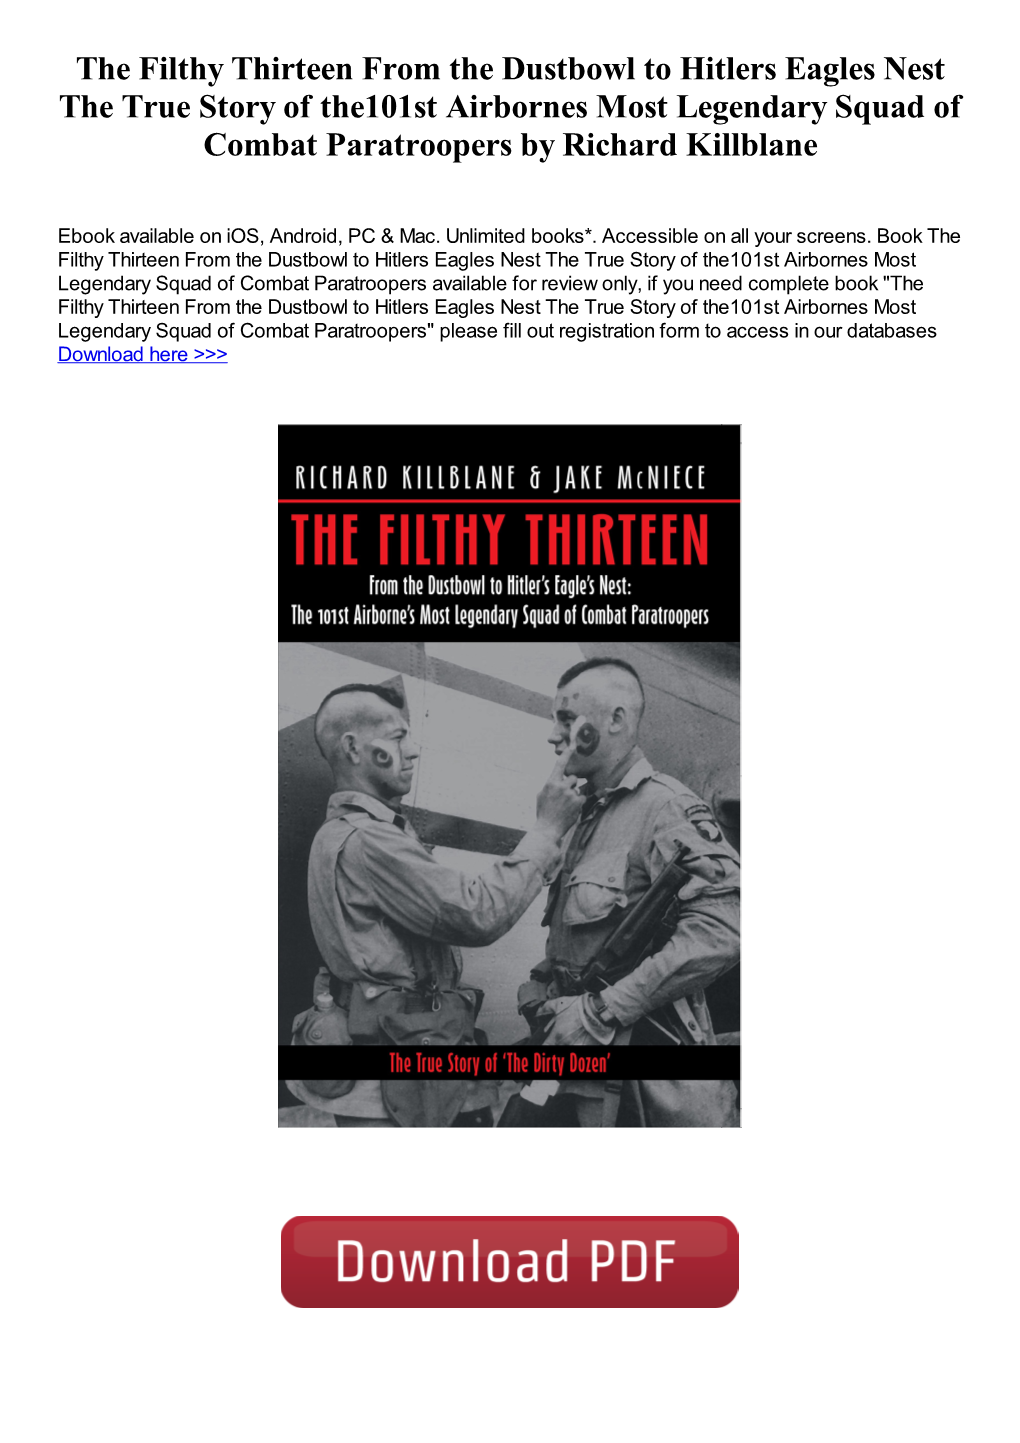 The Filthy Thirteen from the Dustbowl to Hitlers Eagles Nest the True Story of The101st Airbornes Most Legendary Squad of Combat Paratroopers by Richard Killblane